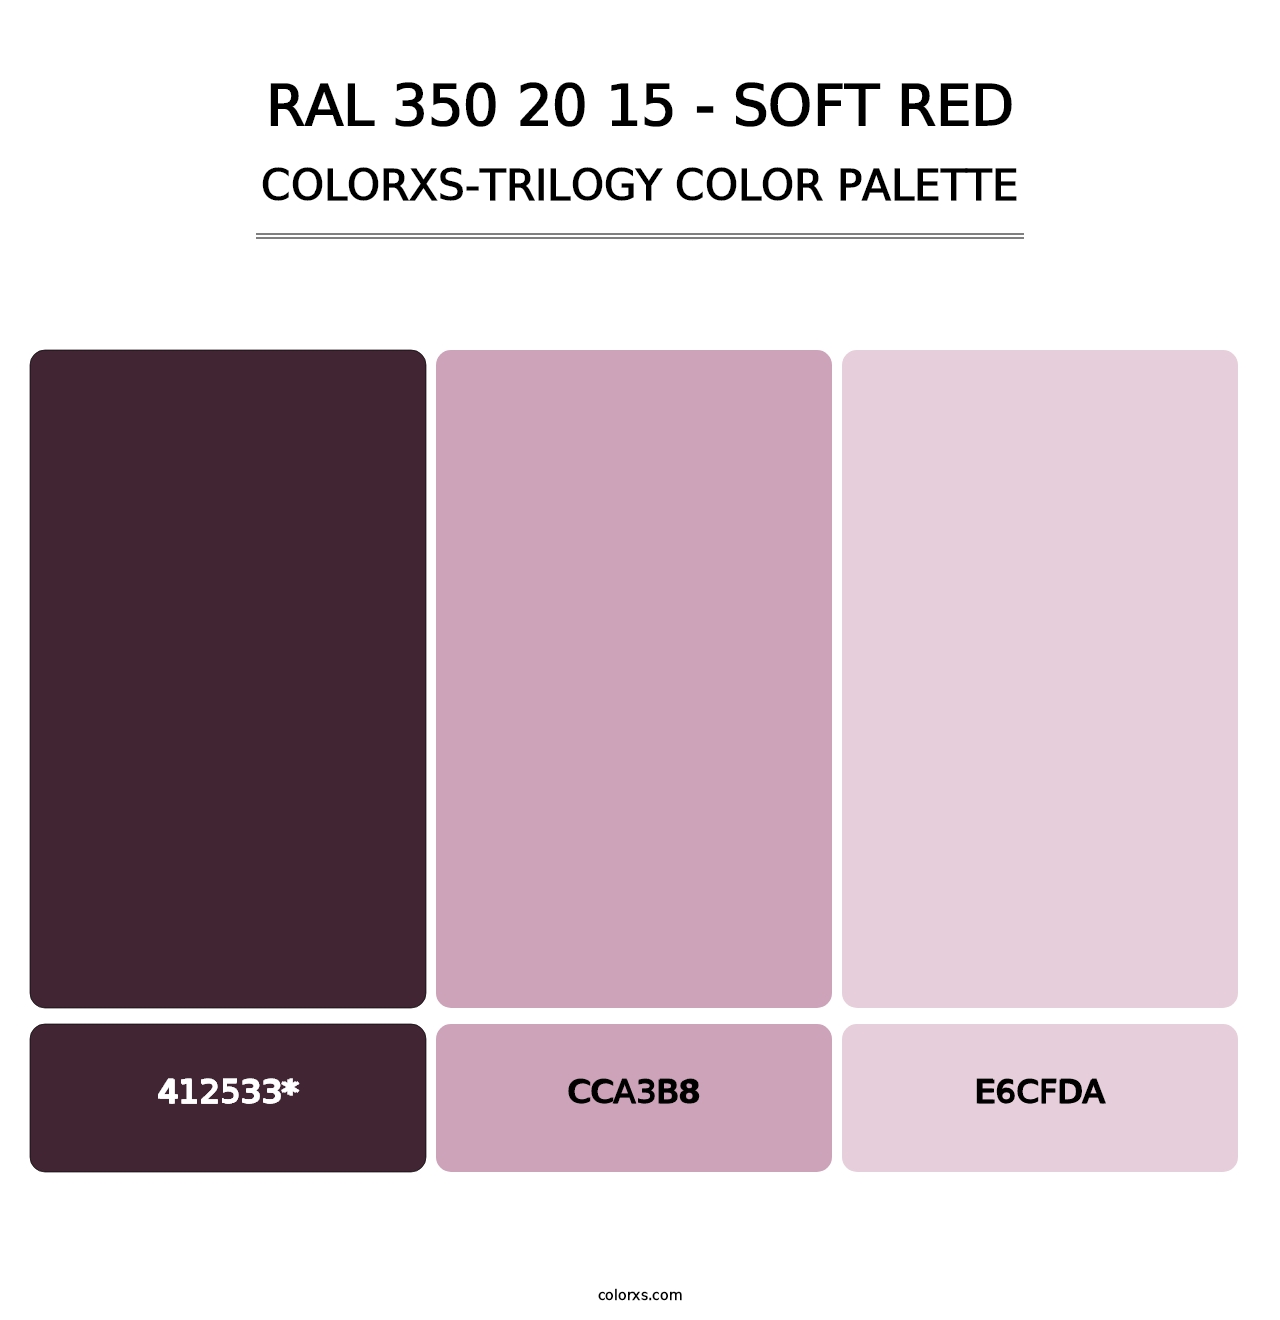 RAL 350 20 15 - Soft Red - Colorxs Trilogy Palette